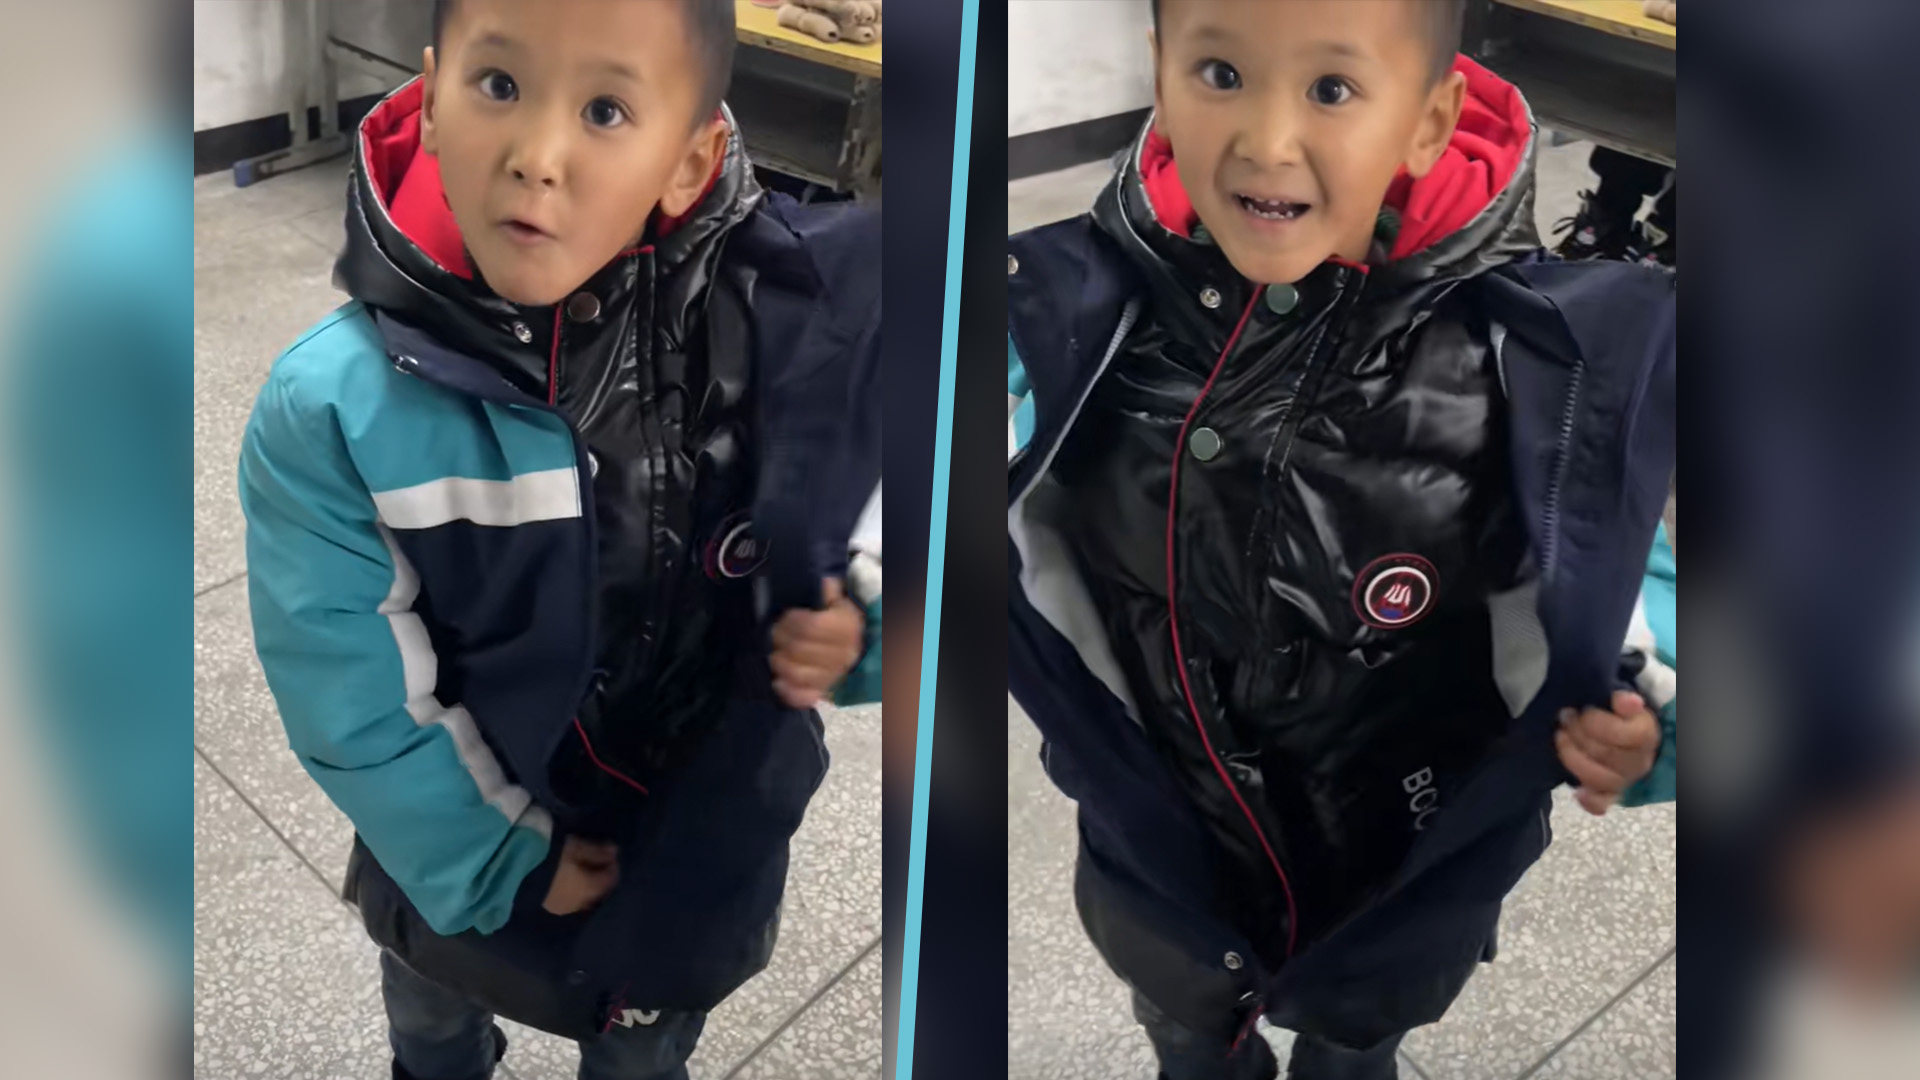 The story of a proud and happy six-year-old boy in China who showed off a new jacket his single, migrant worker father bought for him has captivated mainland social media. Photo: SCMP composite/Douyin